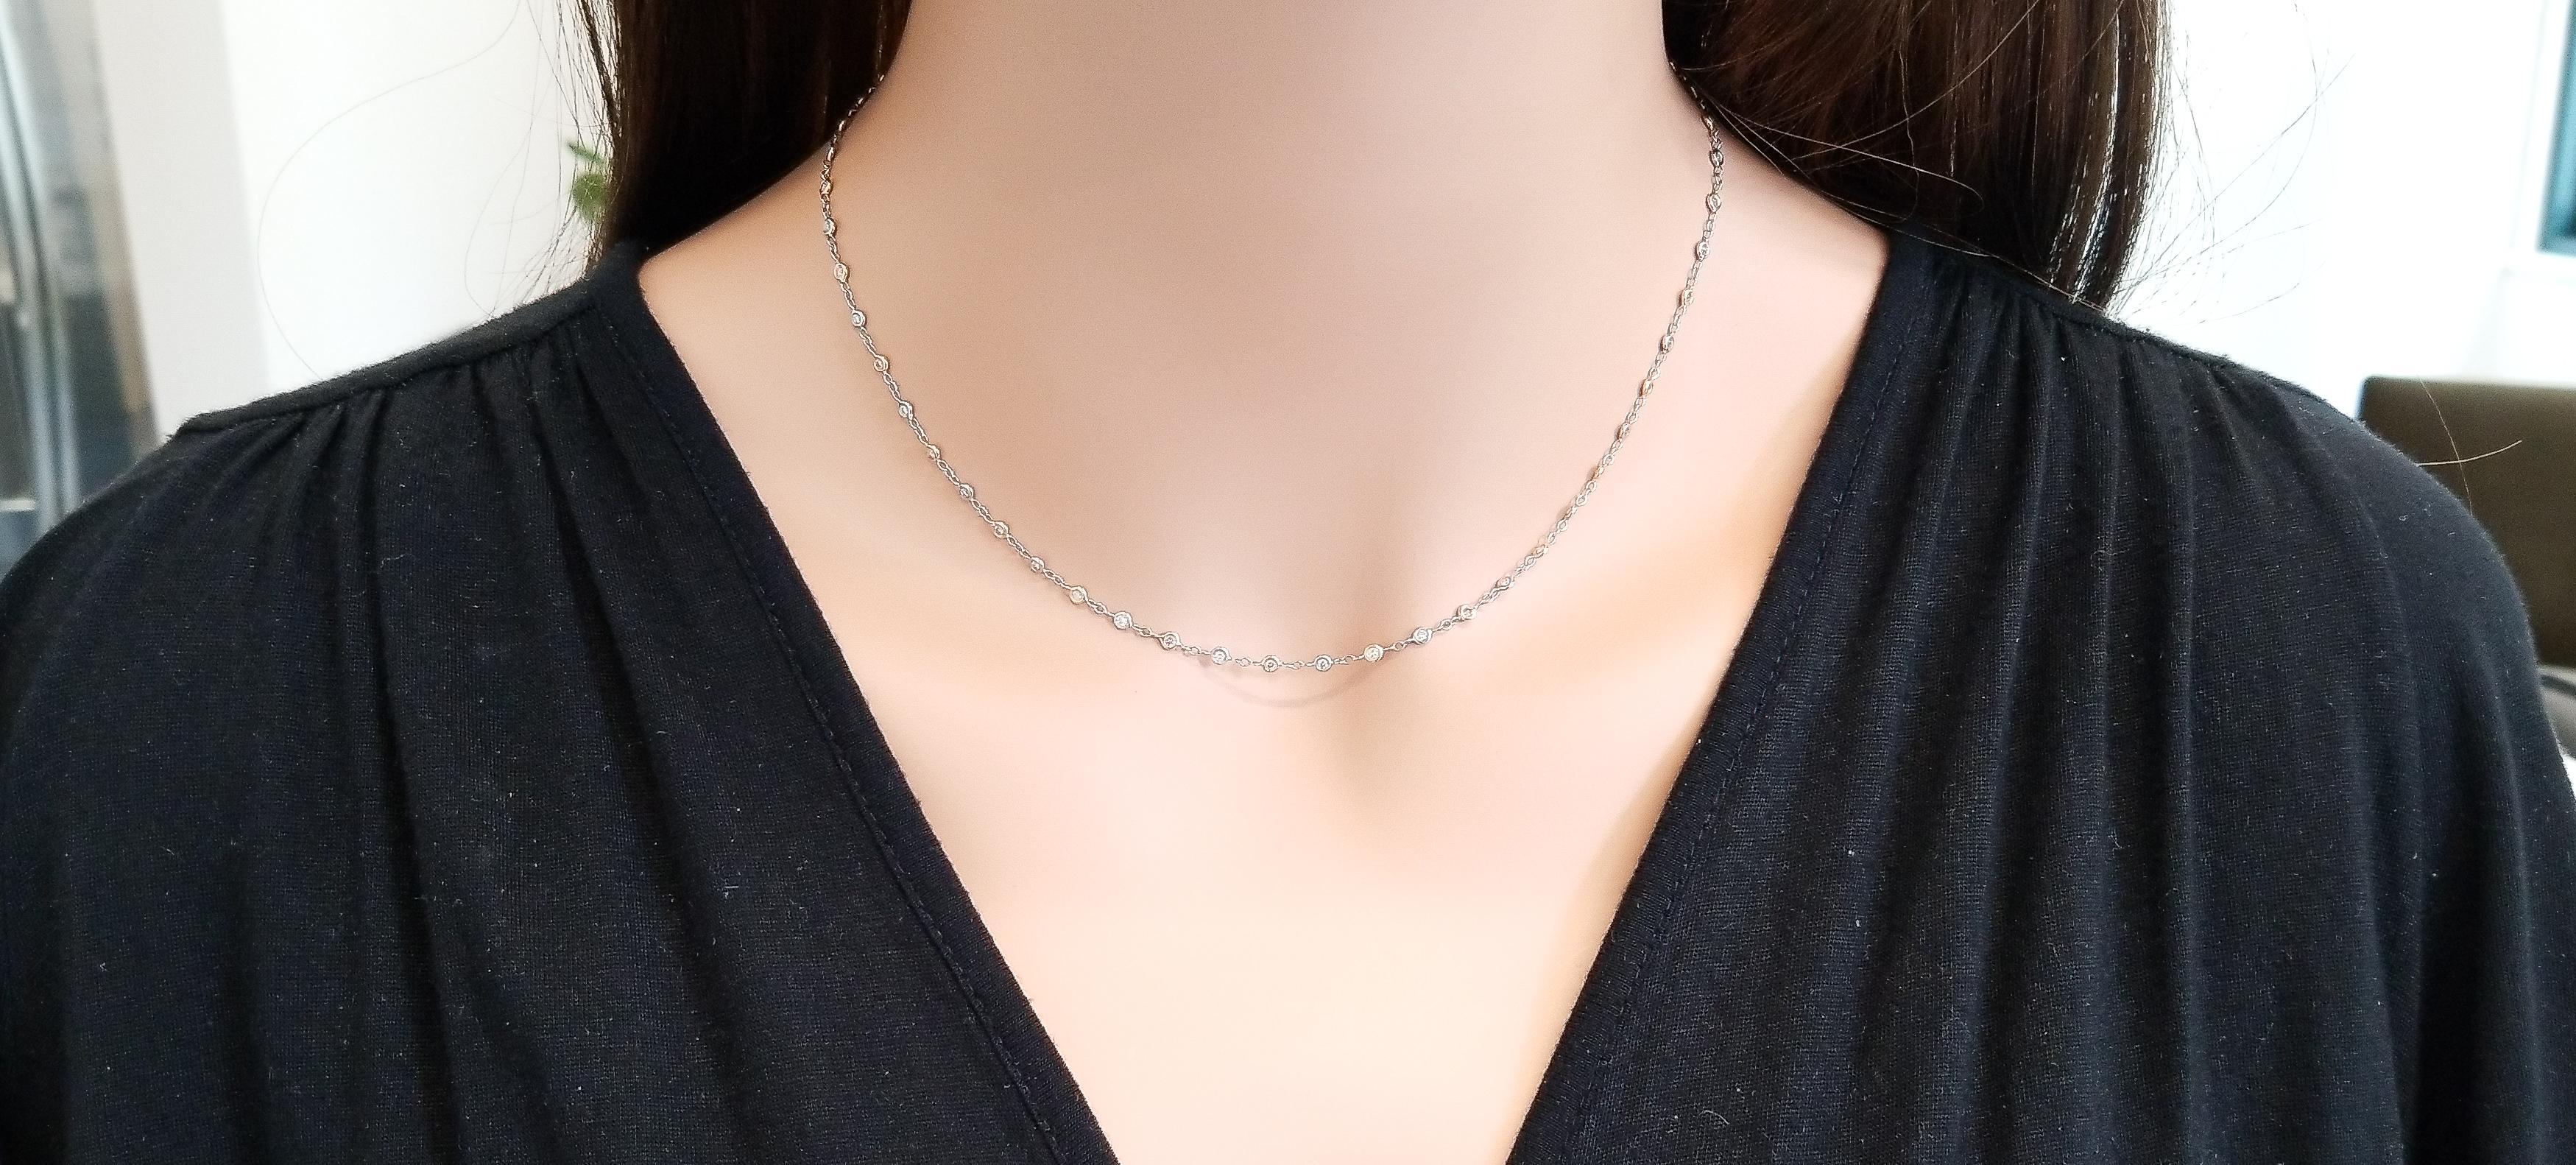 A gorgeous diamond necklace will rarely go overlooked. This 18 inch piece is both rare and stunning. It includes alternating wire-wrapped bezels that set white and natural pink round diamonds. There are 27 white diamonds that total 0.39 carat total